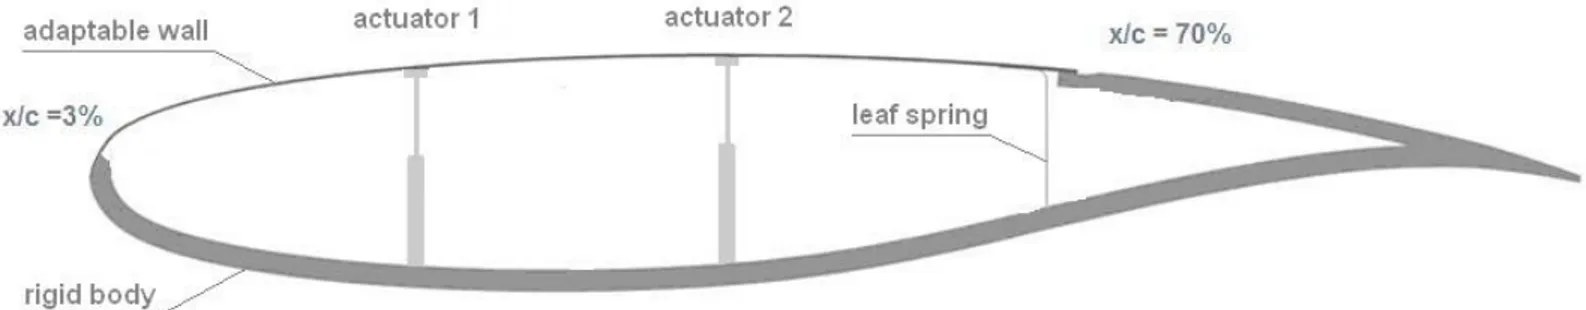 Figure 1: Morphing wing section.